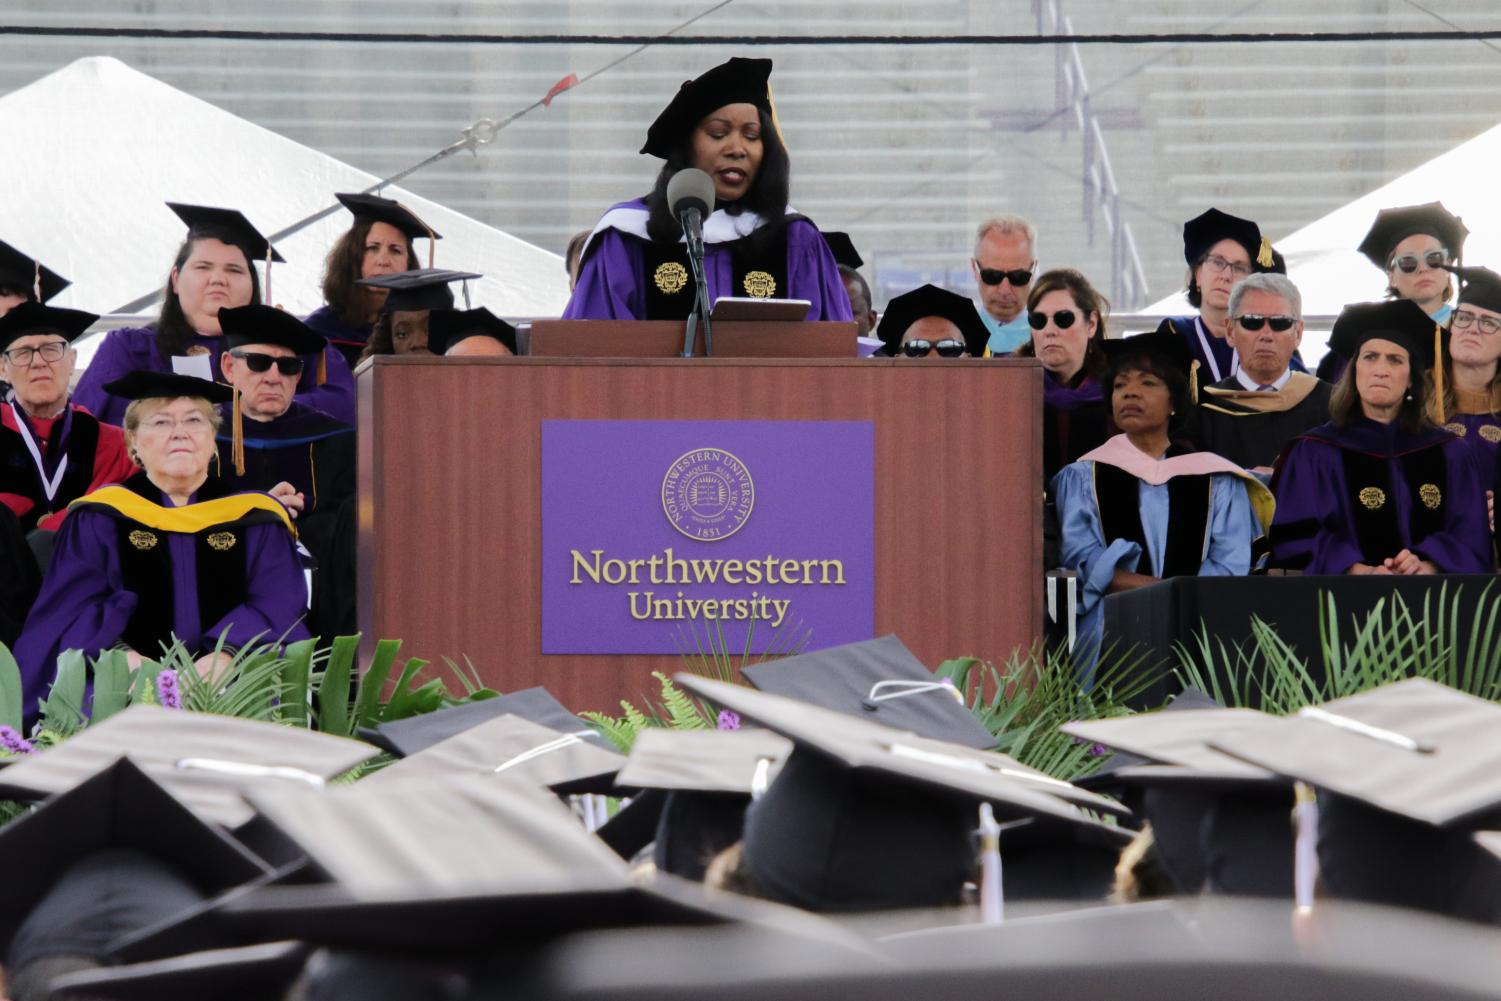  A person in a purple gown and graduation cap speaks in front of a brown podium.